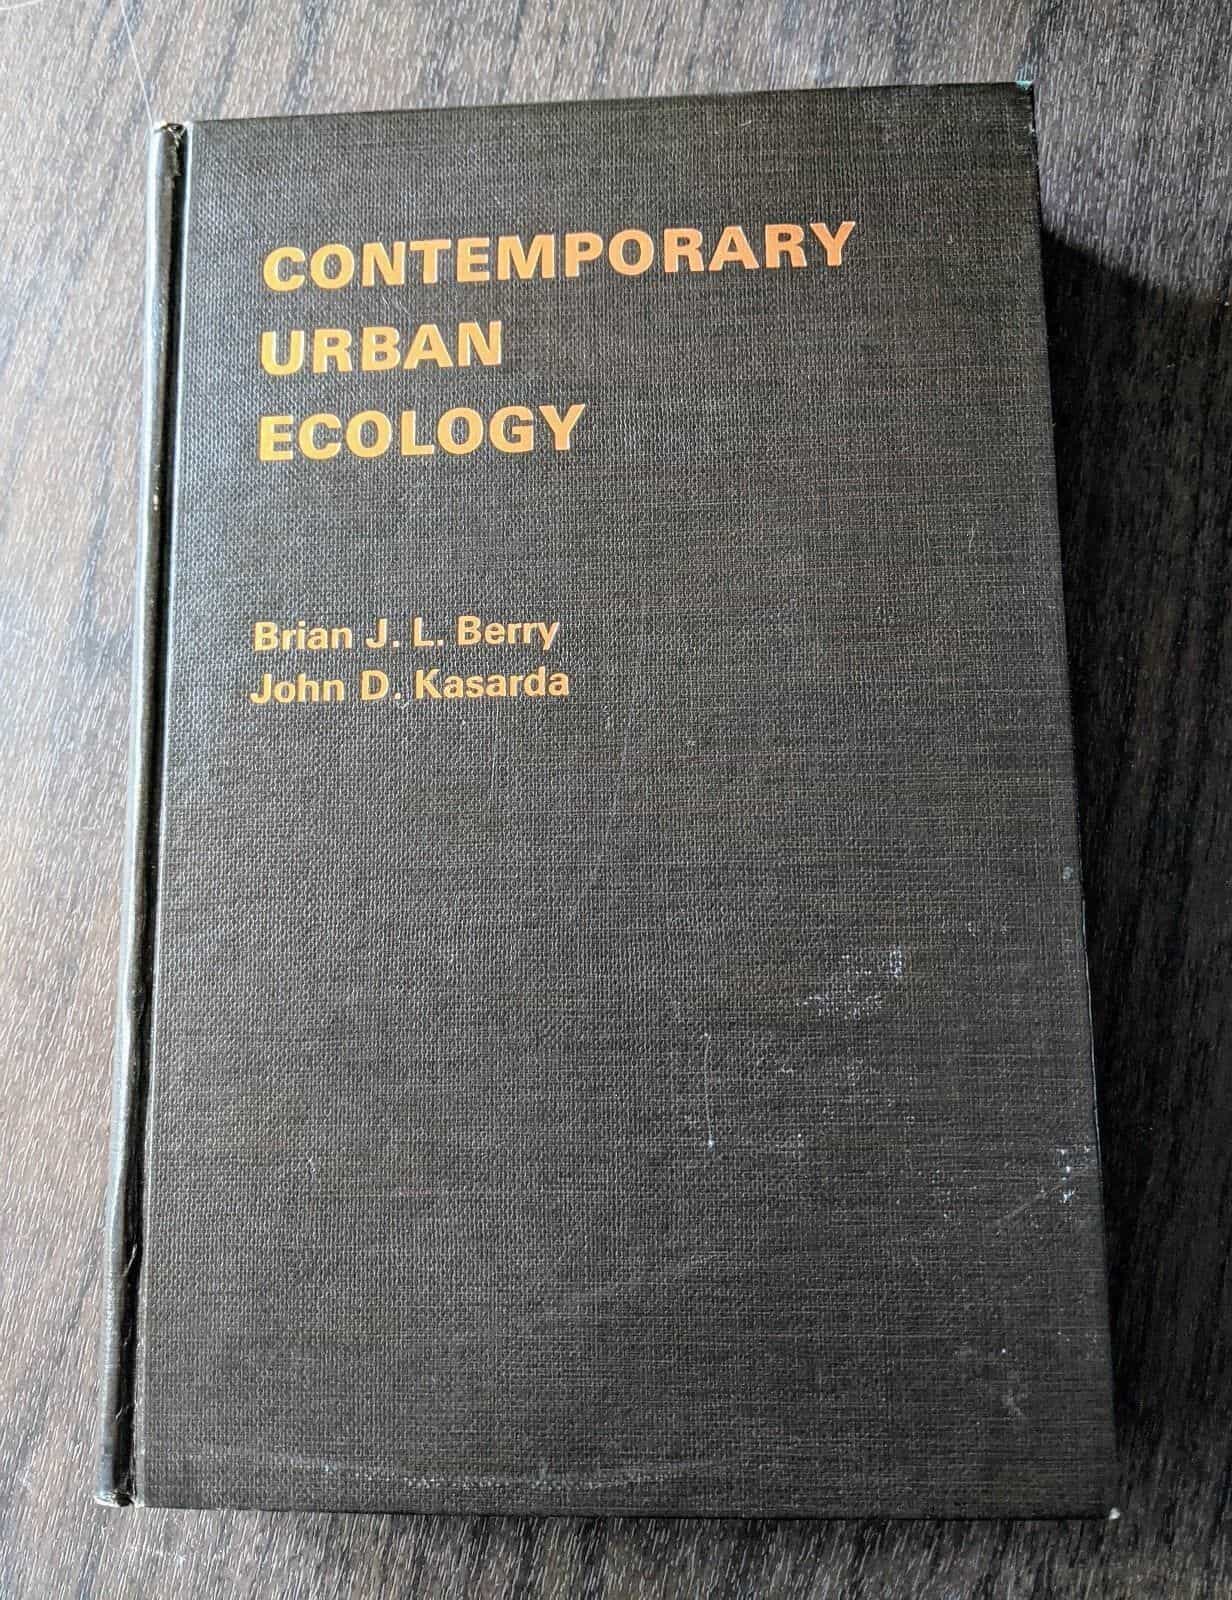 Contemporary Urban Ecology by Brian J.L. Berry Book